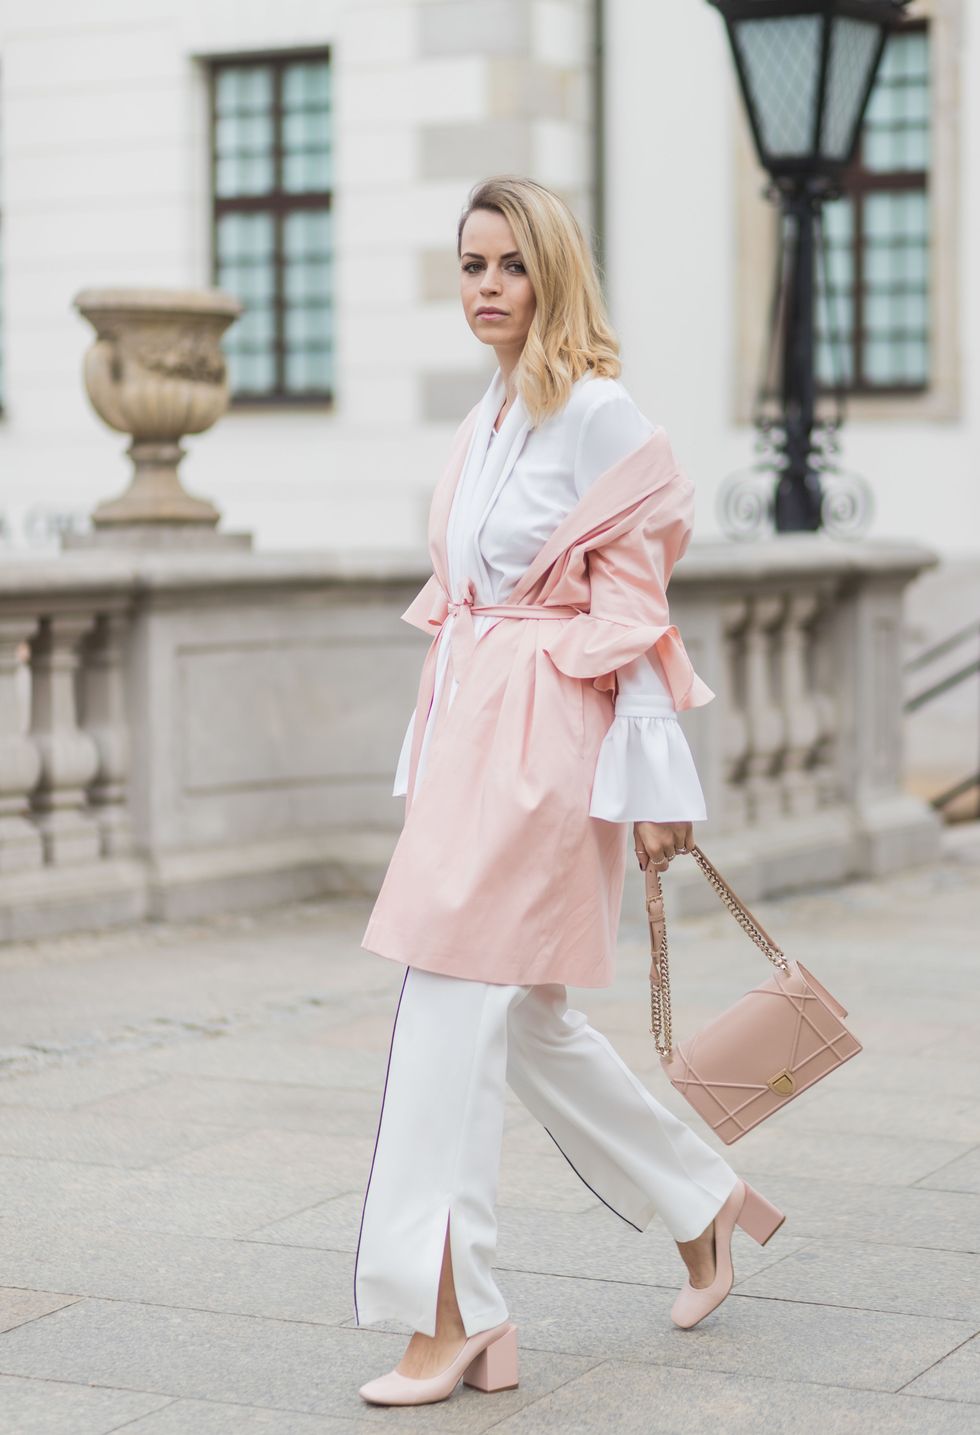 White, Clothing, Pink, Street fashion, Fashion, Trench coat, Outerwear, Footwear, Coat, Shoulder, 